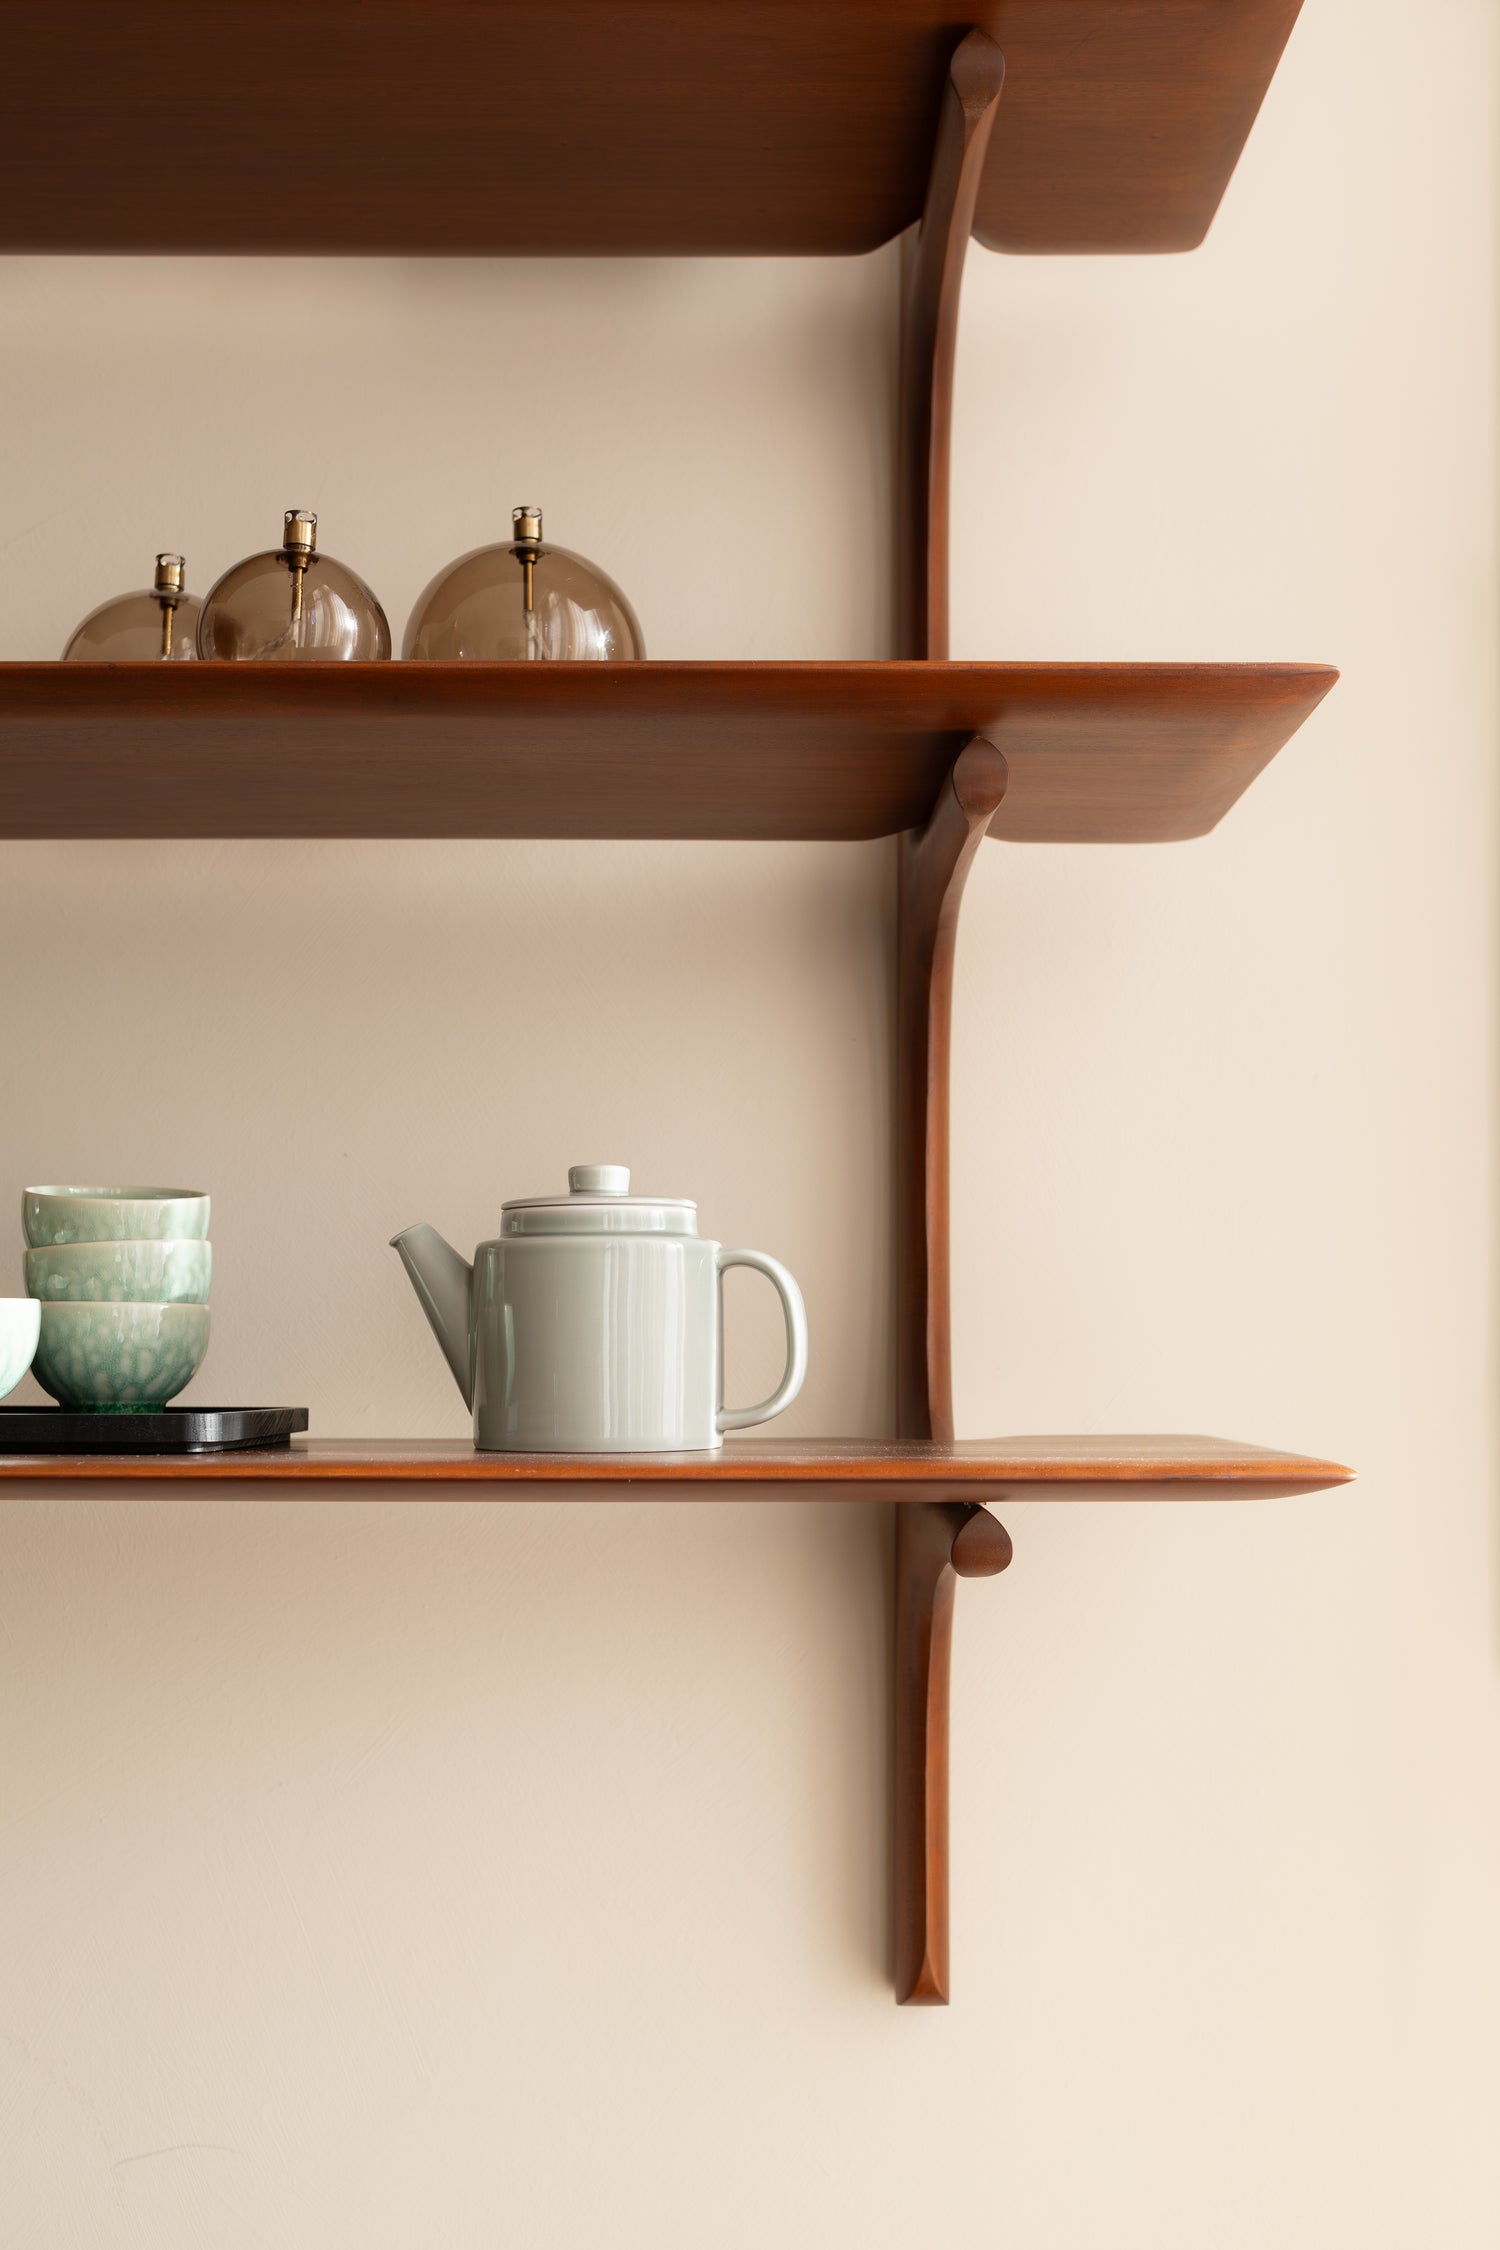 PI Wall Shelf 2 Mahogany by Ethnicraft with decoration details